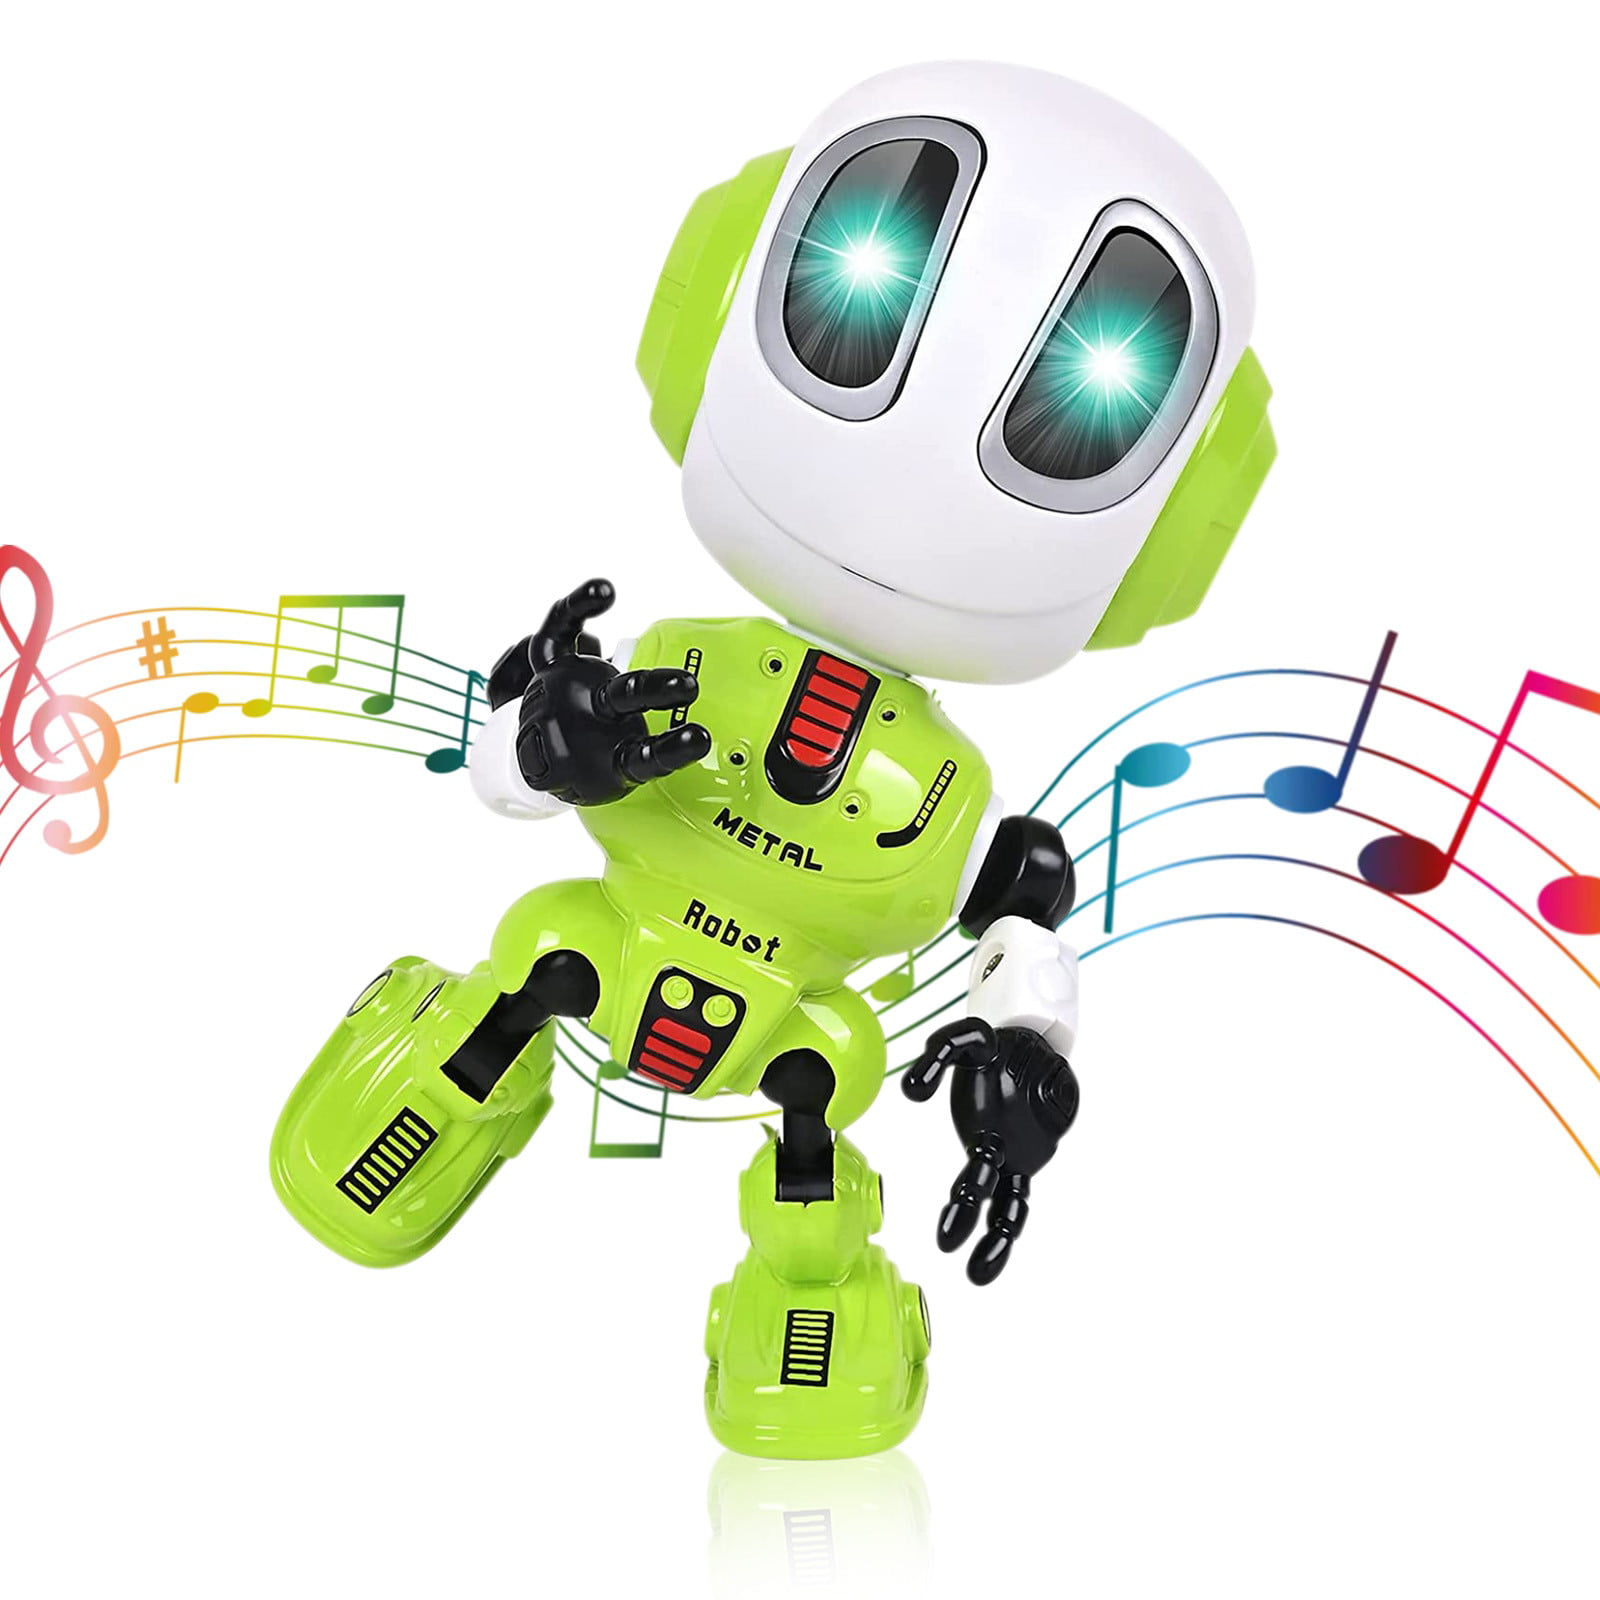 Talking and Voice Recording Robot Fun Gifts For Kids Toys Education Presents UK 